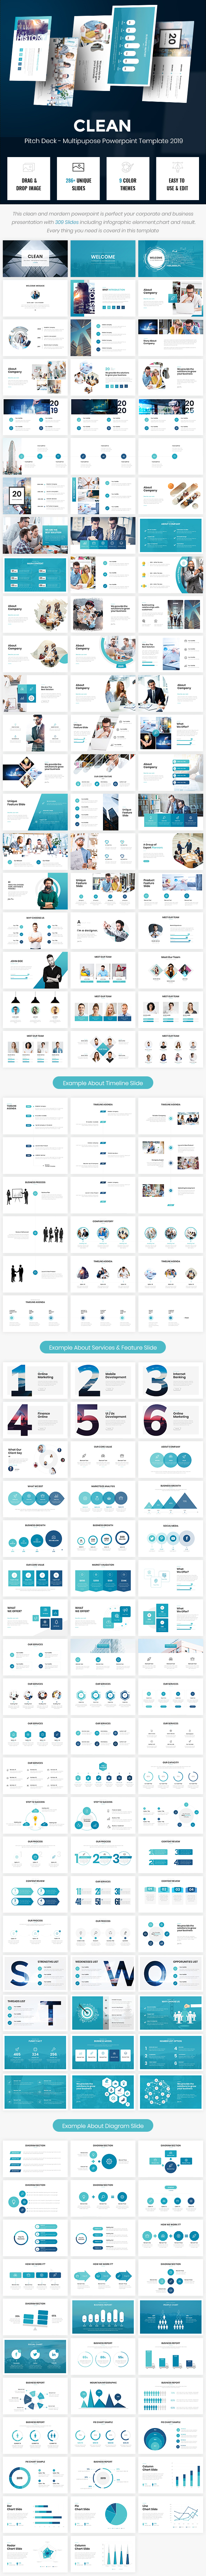 Clean - Pitch Deck Multipurpose Powerpoint Template